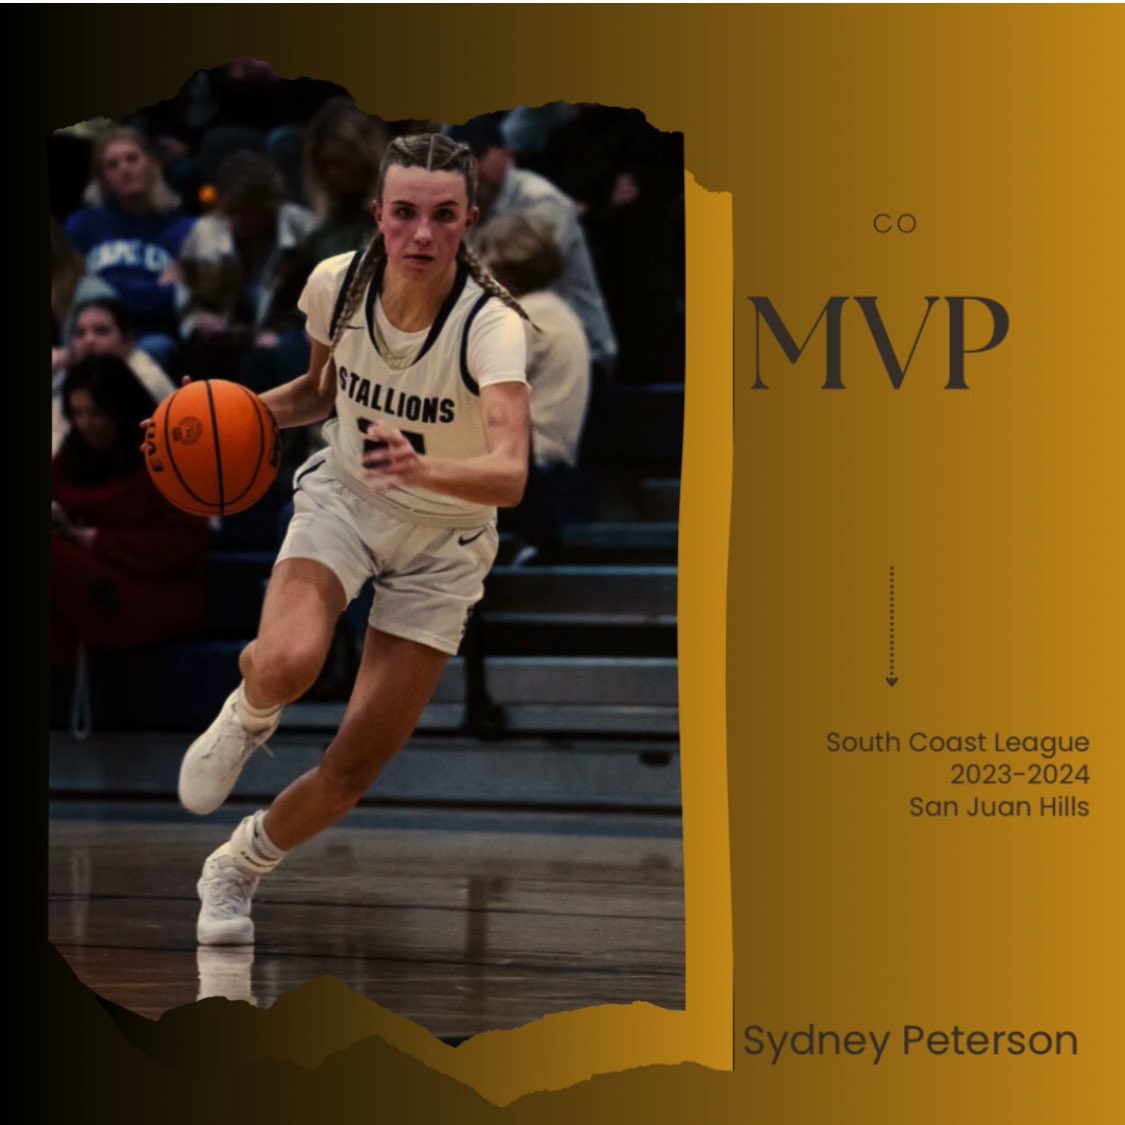 Sydney Peterson has been selected as co MVP of the South Coast League! An electrifying force that-When scouting opponents her coach would confidently say “Ya but we have Sydney”. She avg 14pts/6.6reb/3.7stl on her way to: -League title -D1 playoff win -1167 career pts